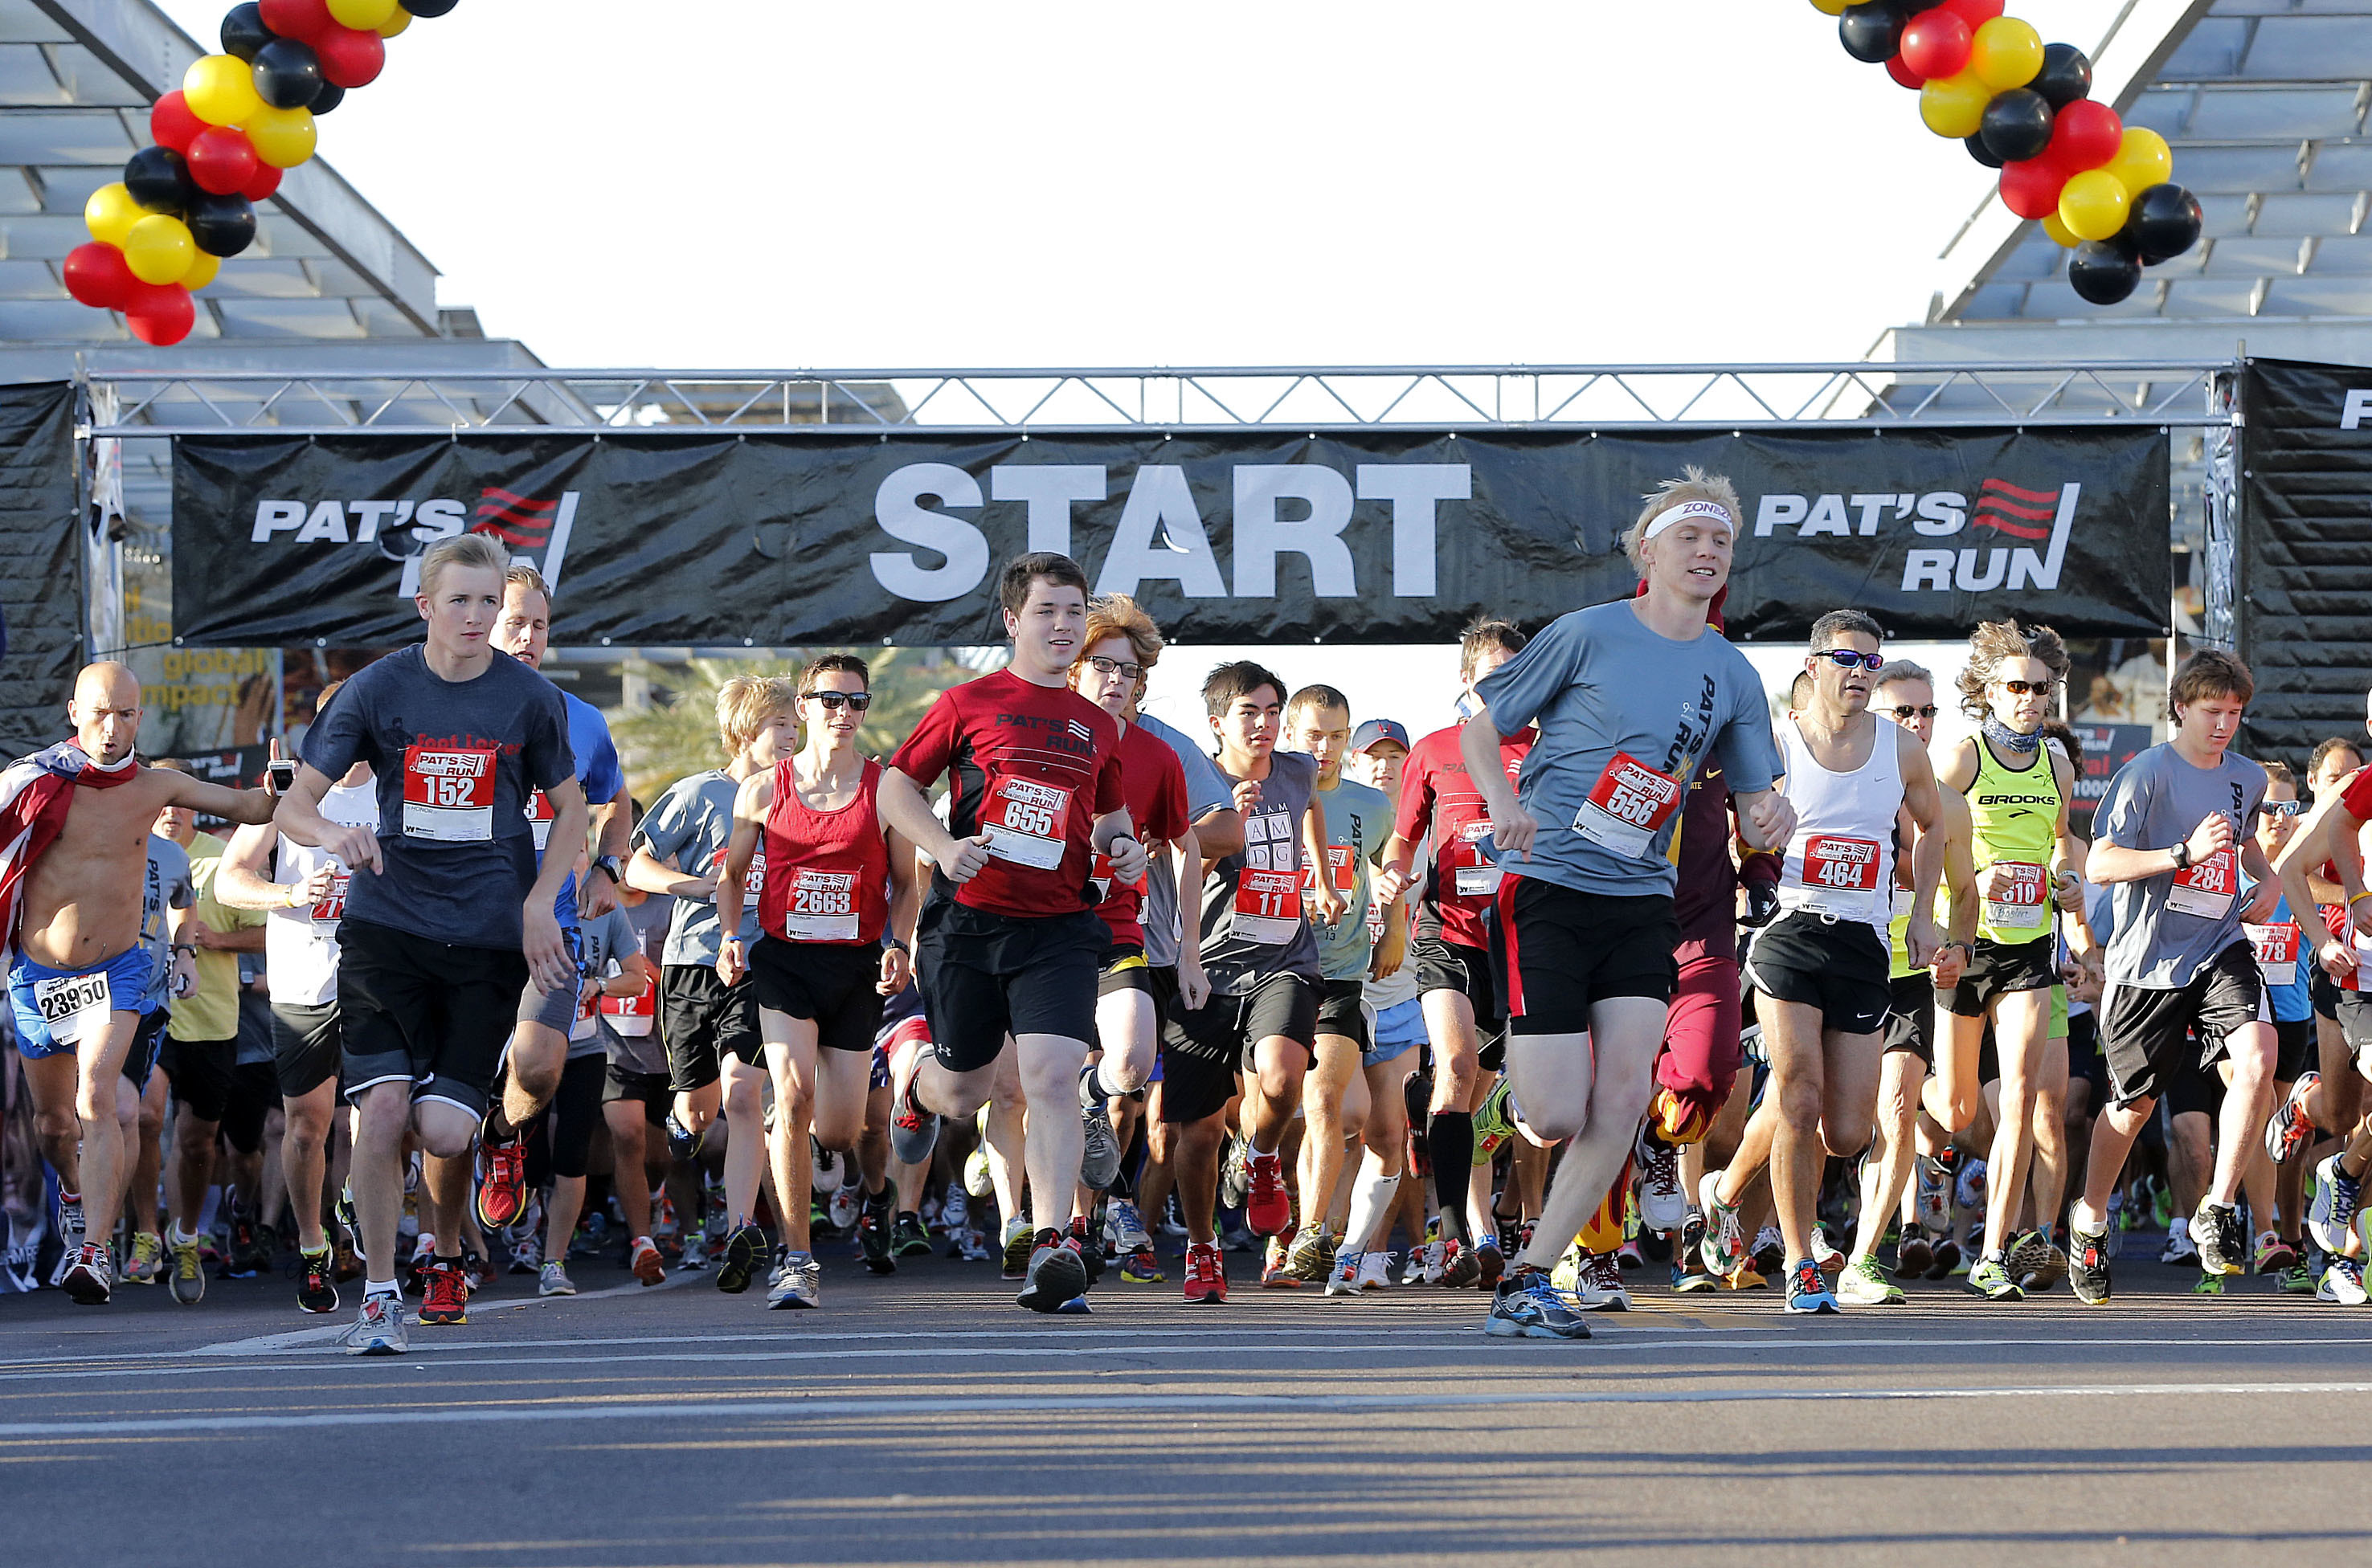 Pat’s Run shadow runs expand to 32 cities to honor Tillman The Daily